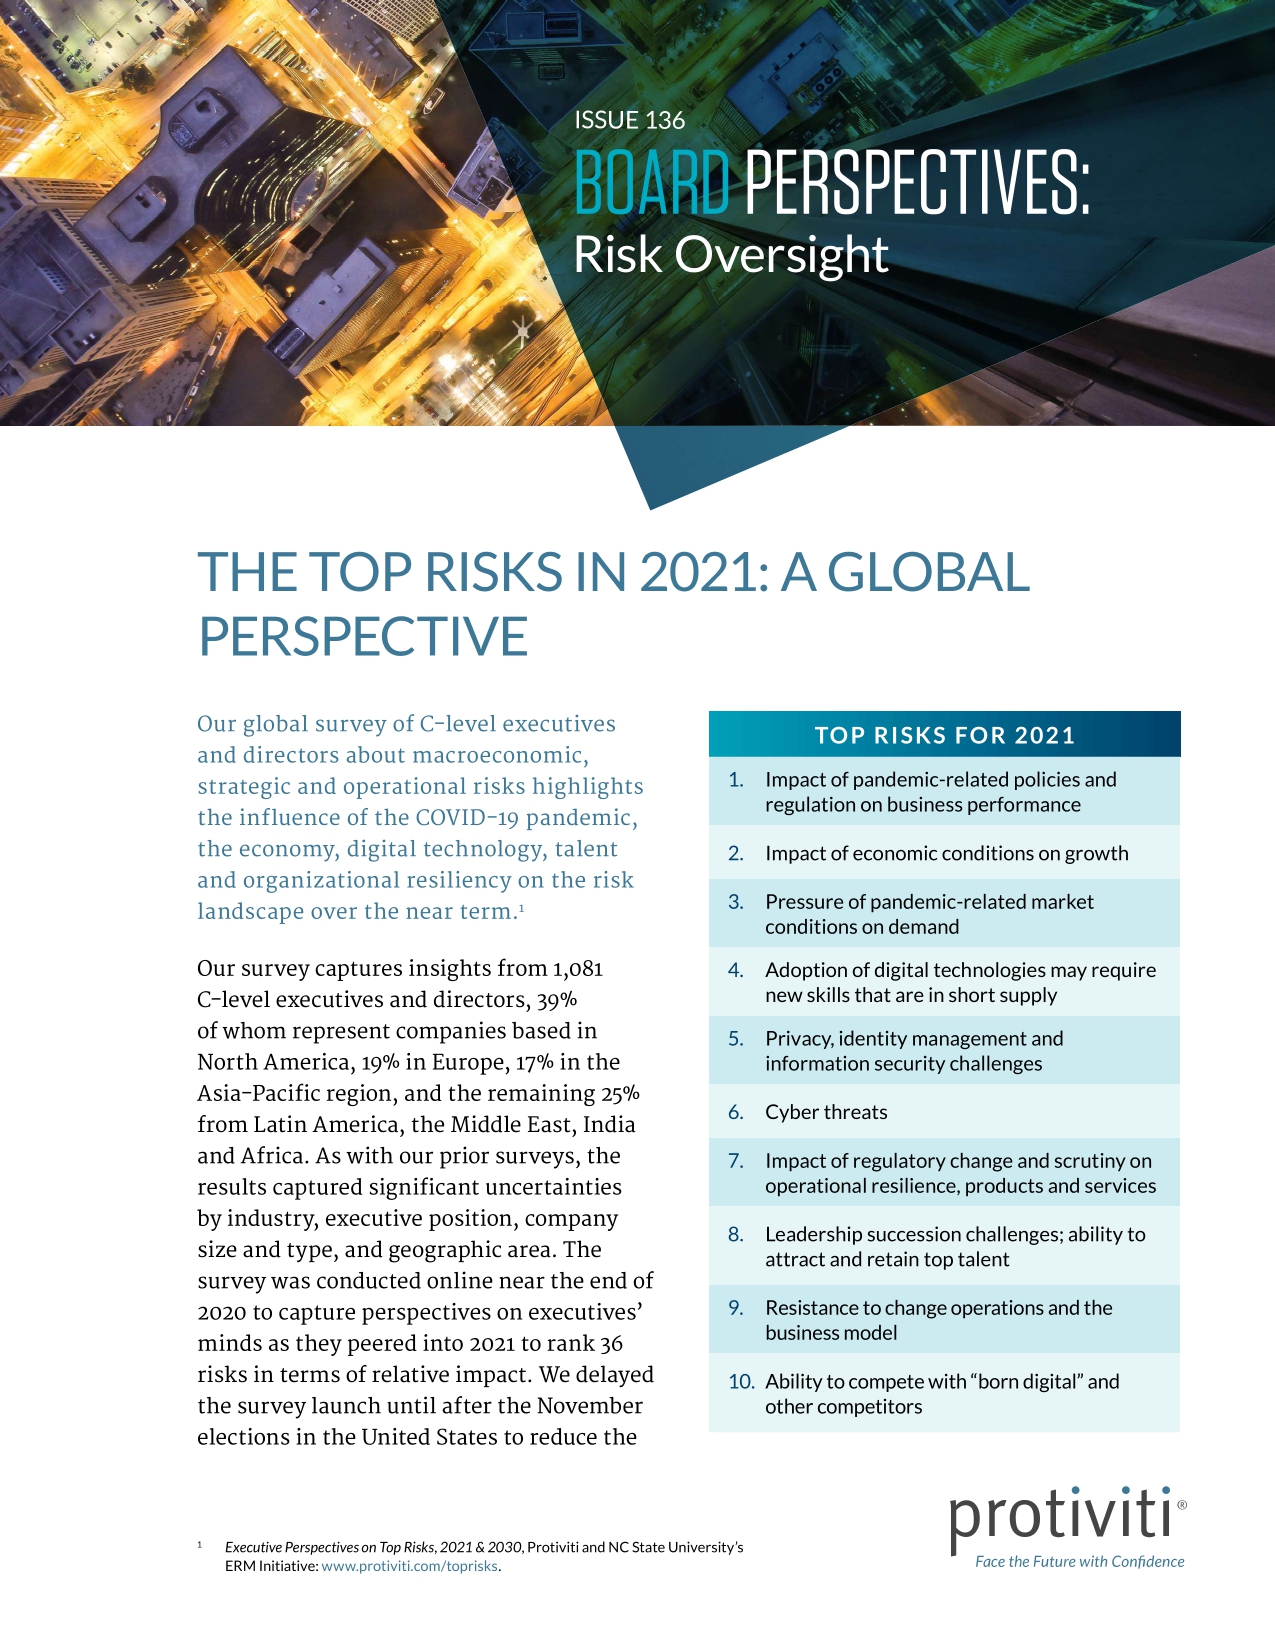 Screenshot of the first page of The Top Risks in 2021 A Global Perspective